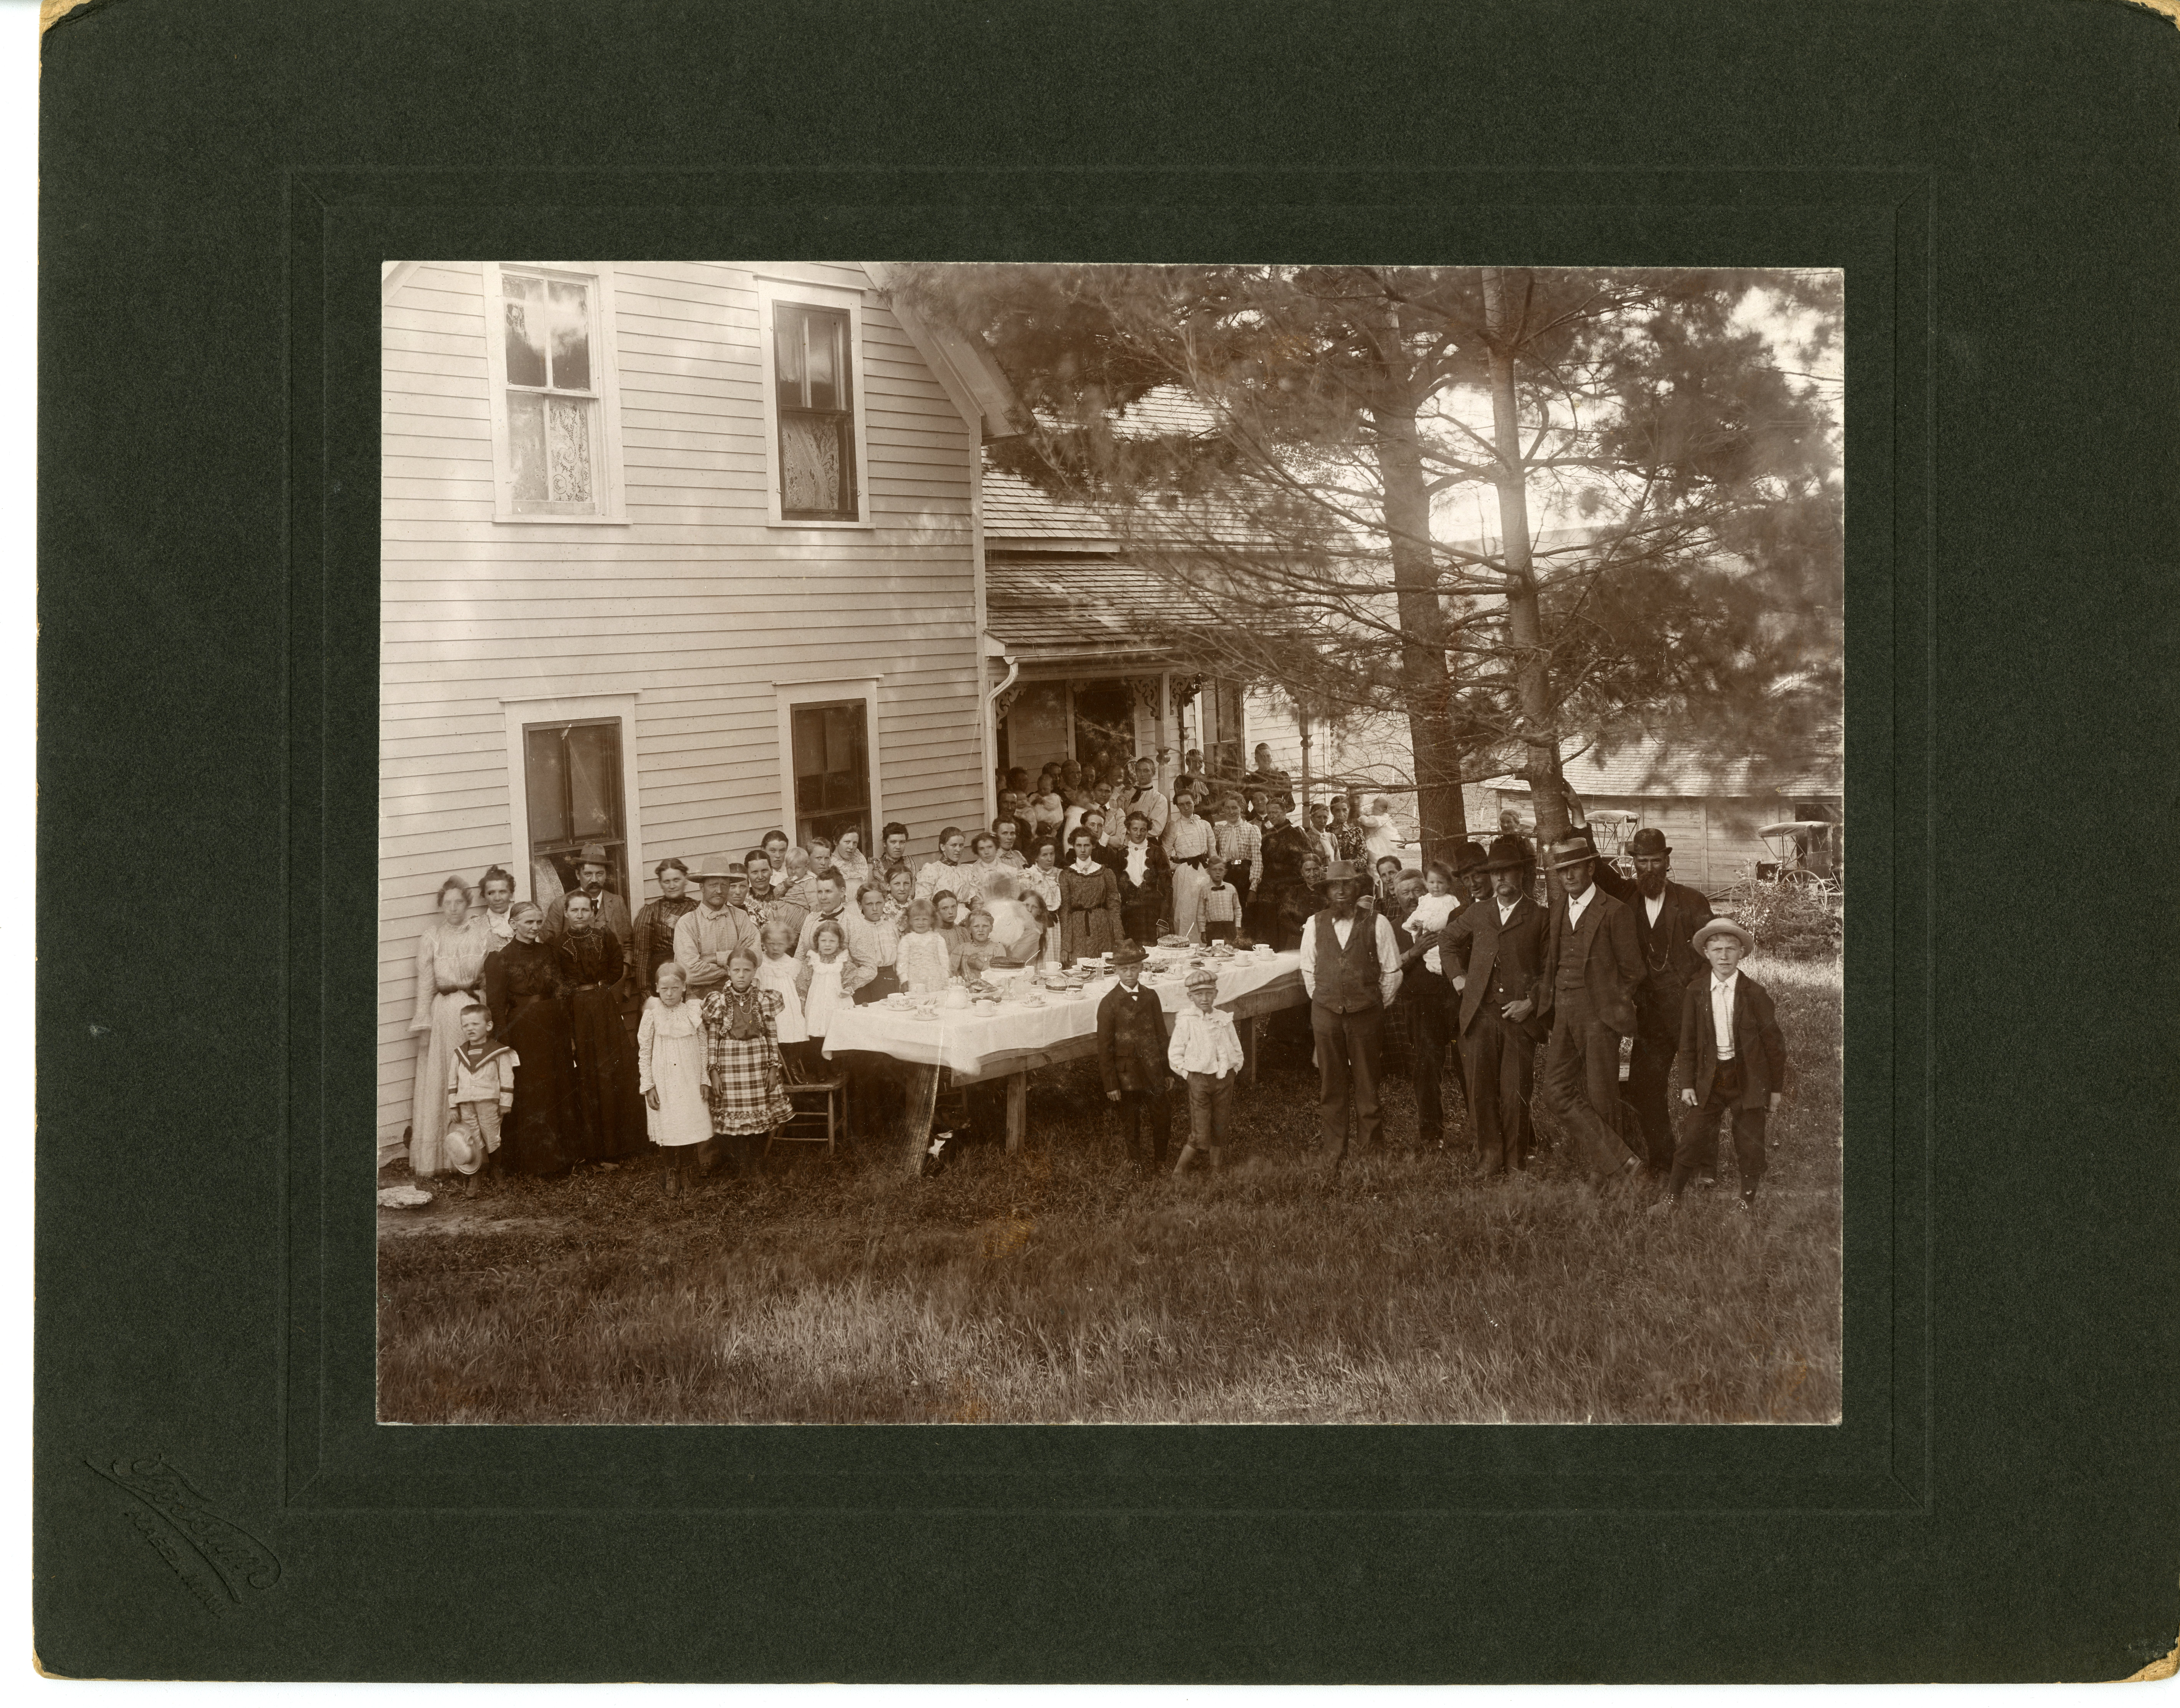 Large group of men, women, and children outside of a house.